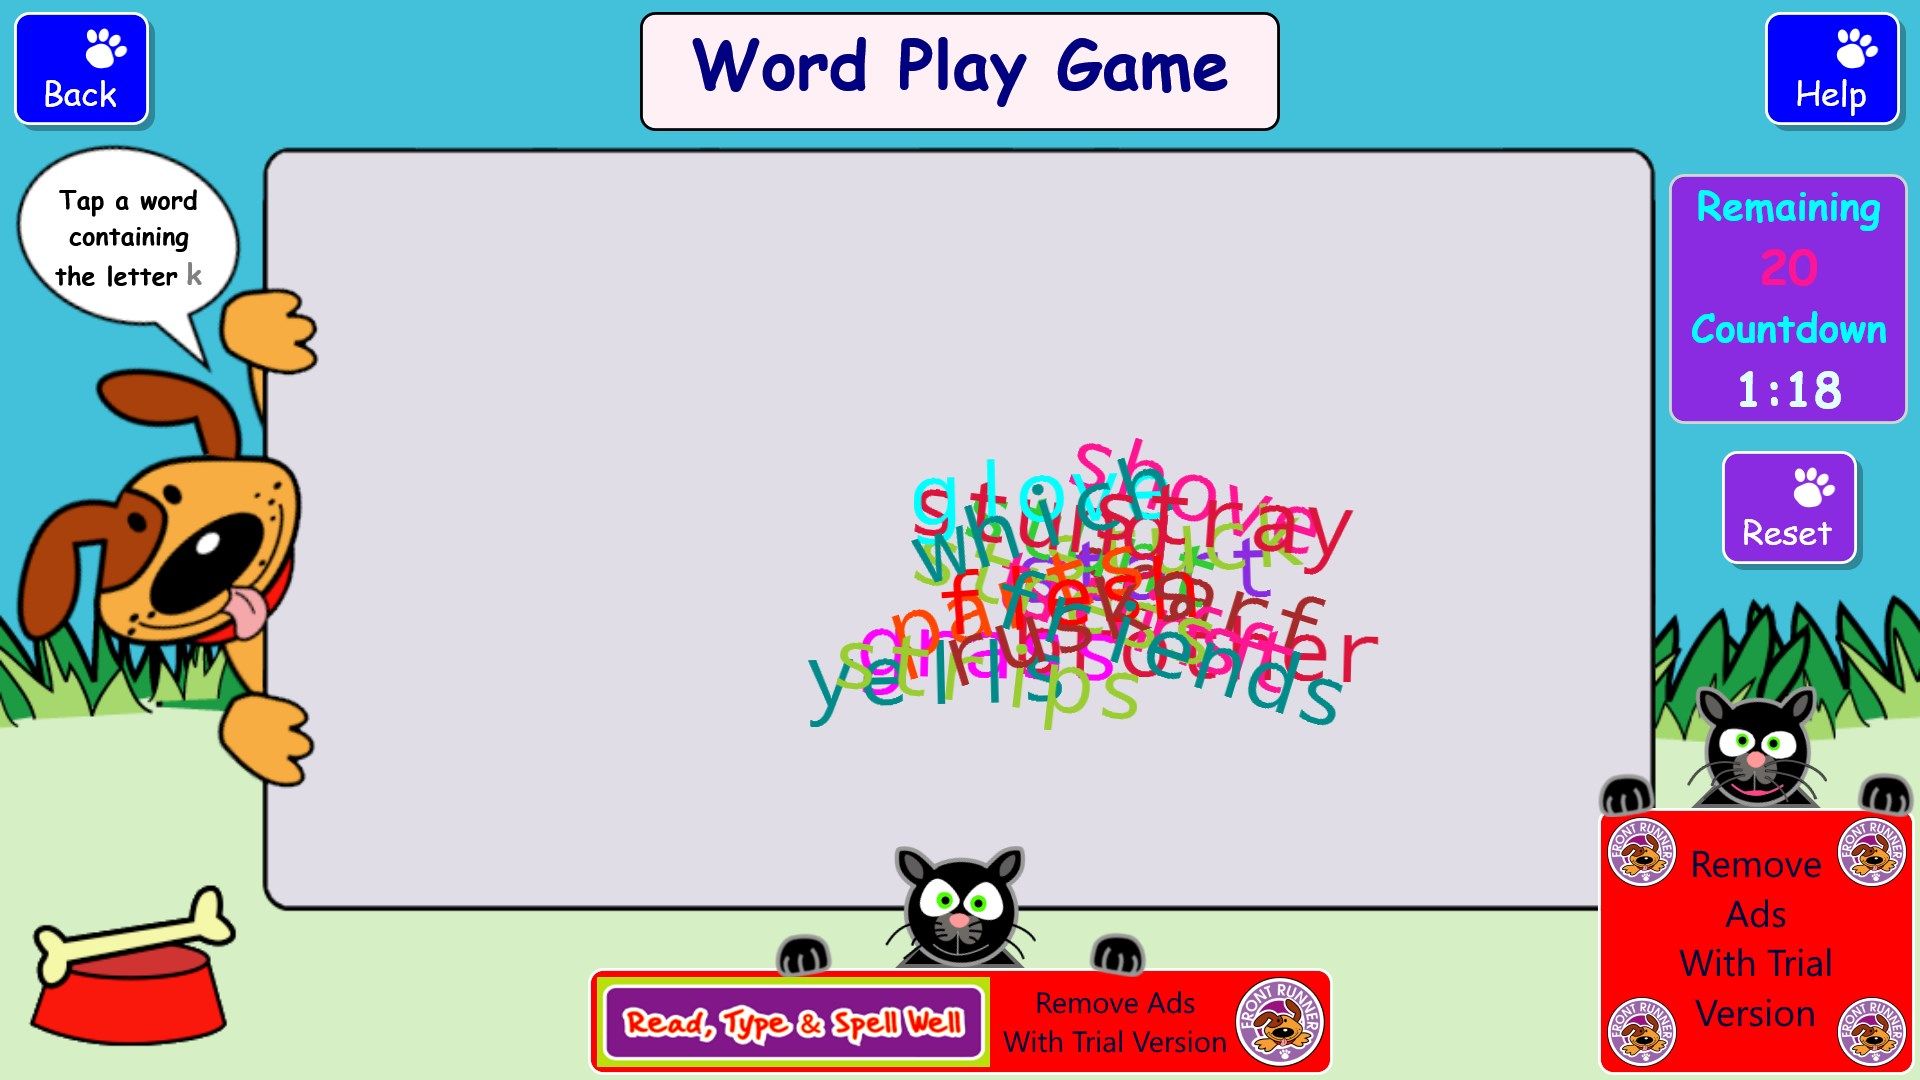 Read Type & Spell Well (Free)